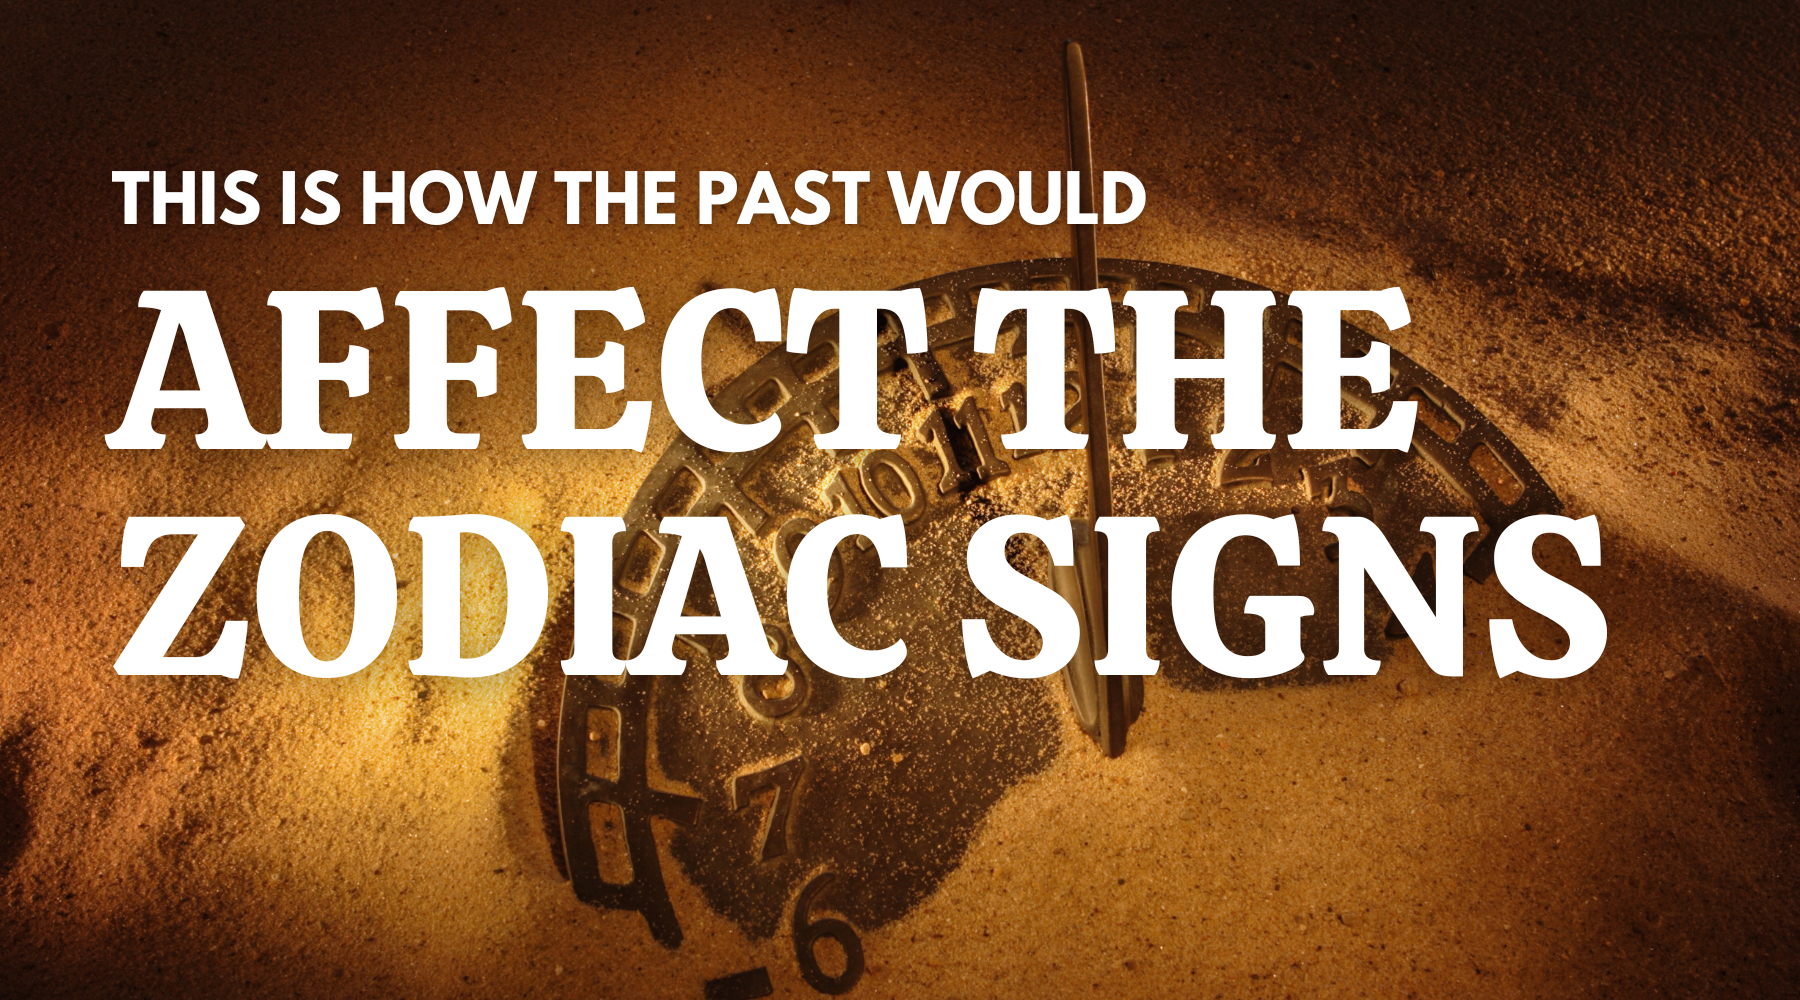 How The Past Would Effect The Zodiac Signs